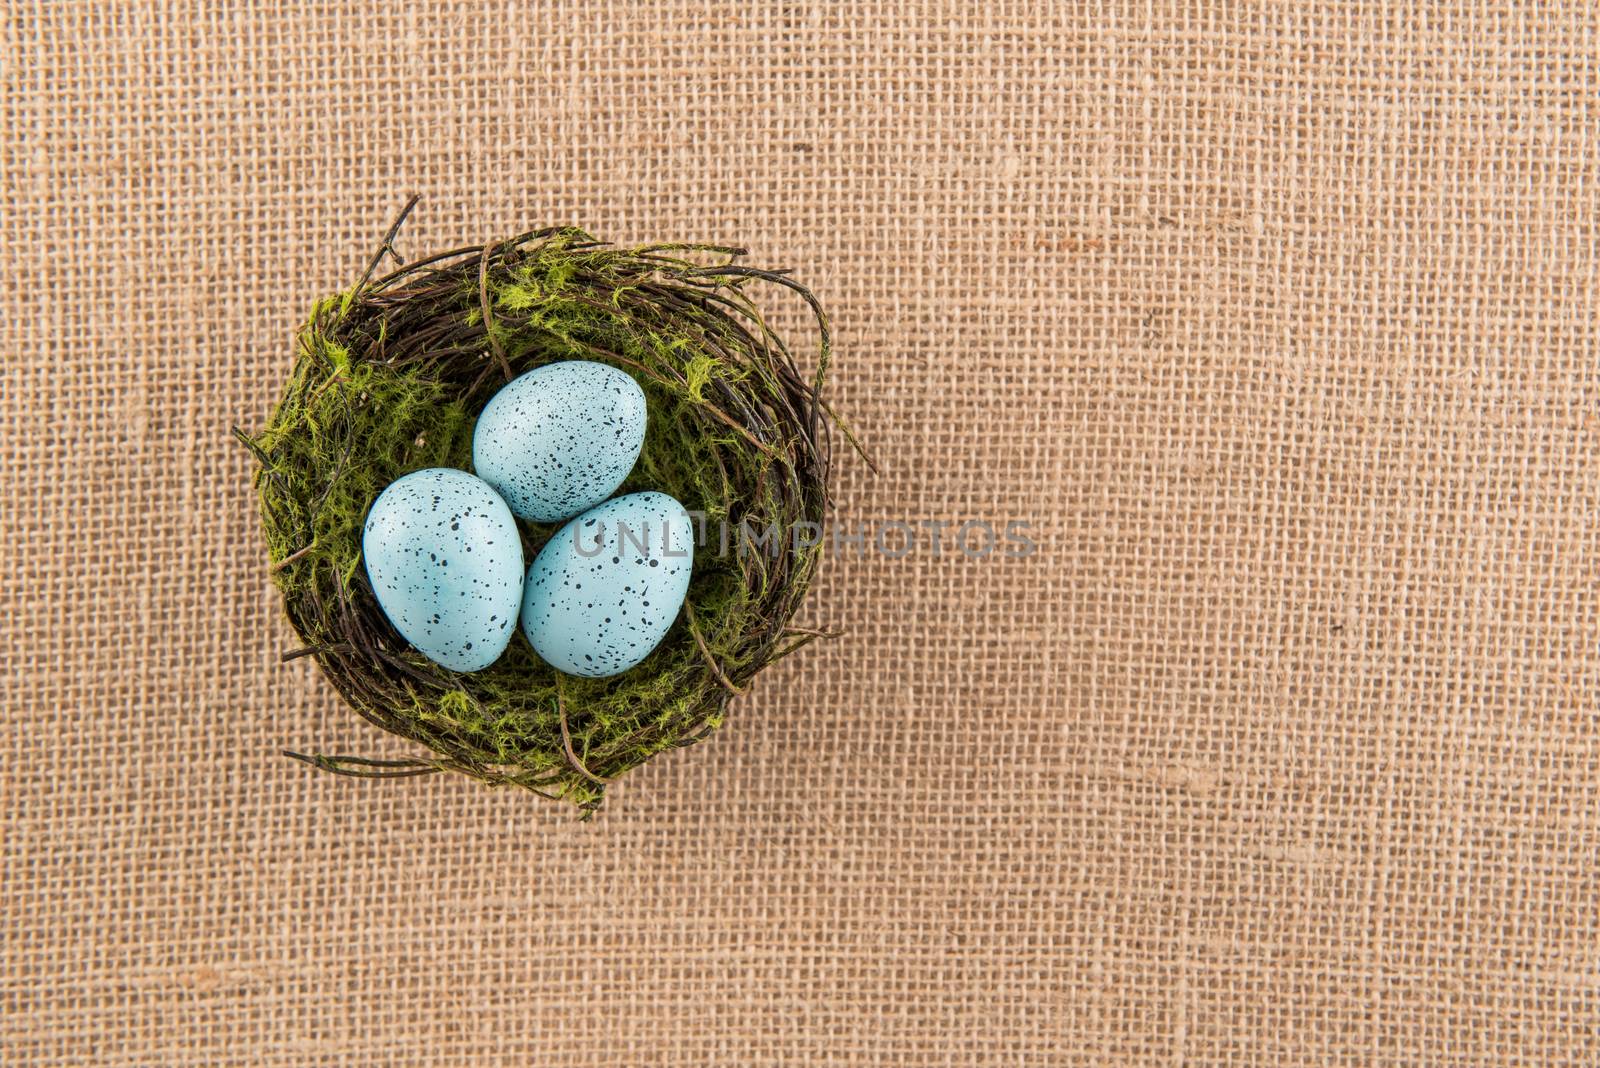 Three Speckled Eggs In Nest by krisblackphotography